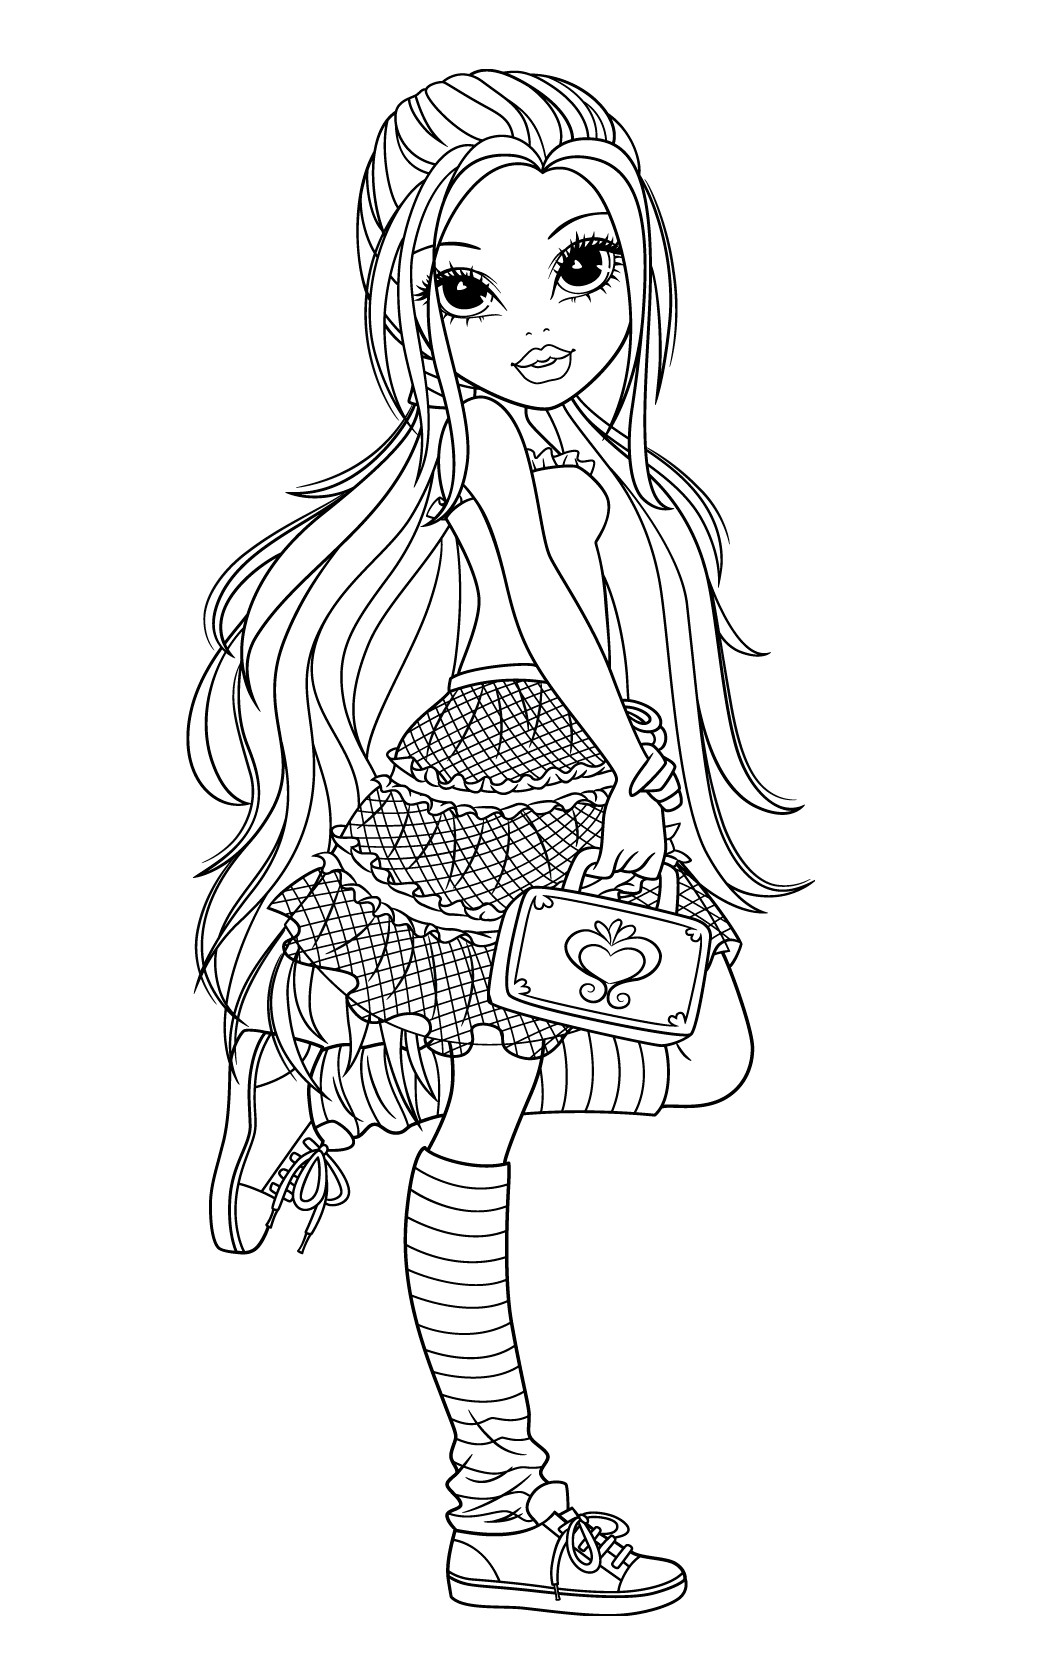 Coloring Book For Girls
 New Moxie Girlz Coloring Pages will be added frequently so